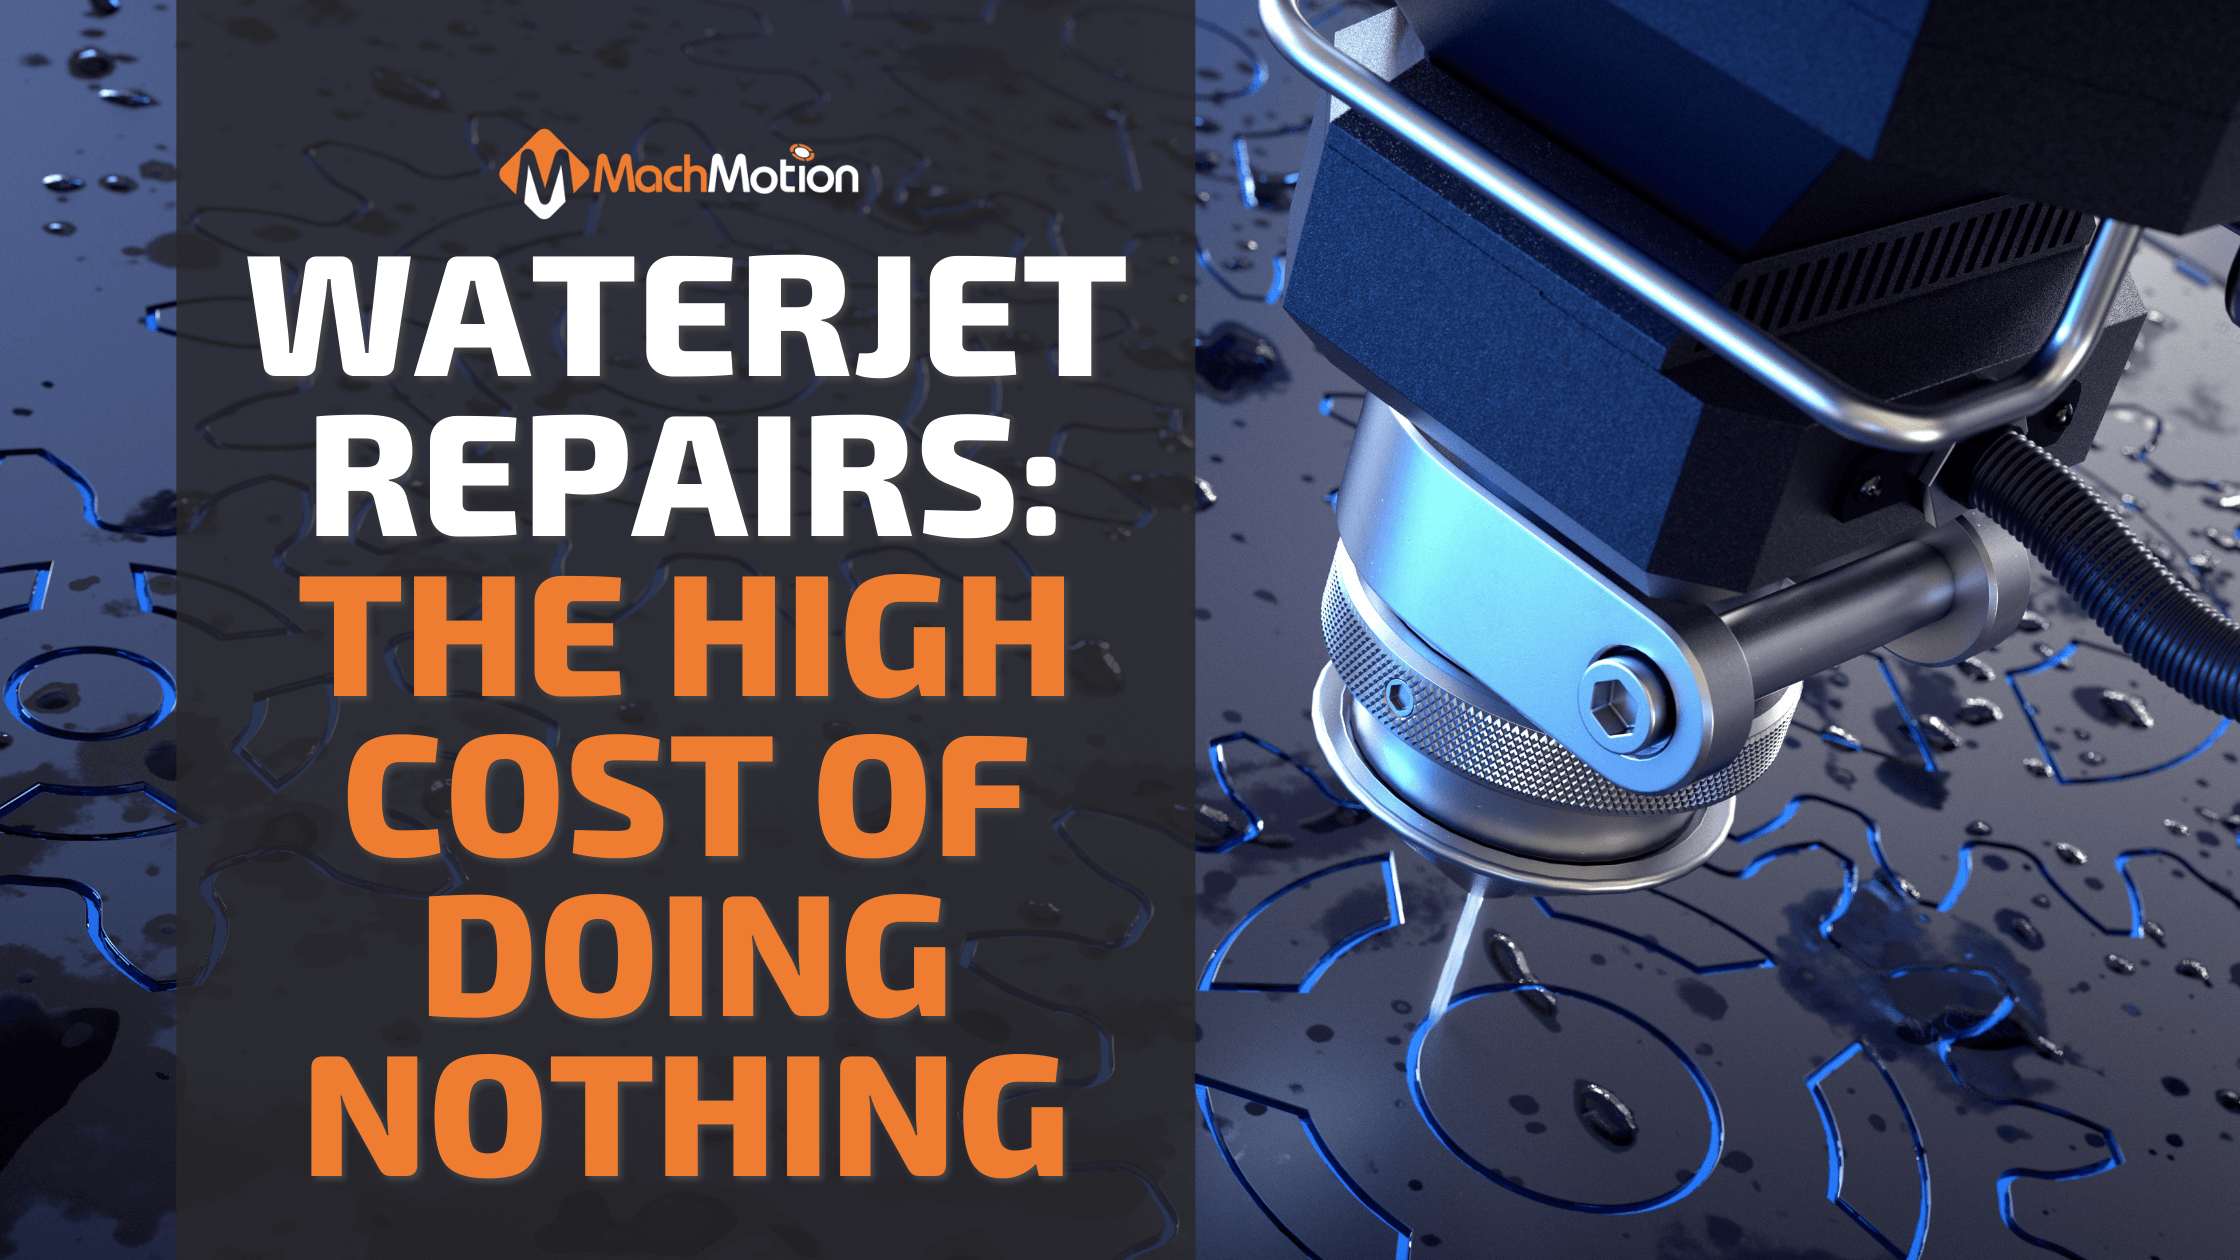 What Are CNC Waterjet Repairs Costing You?